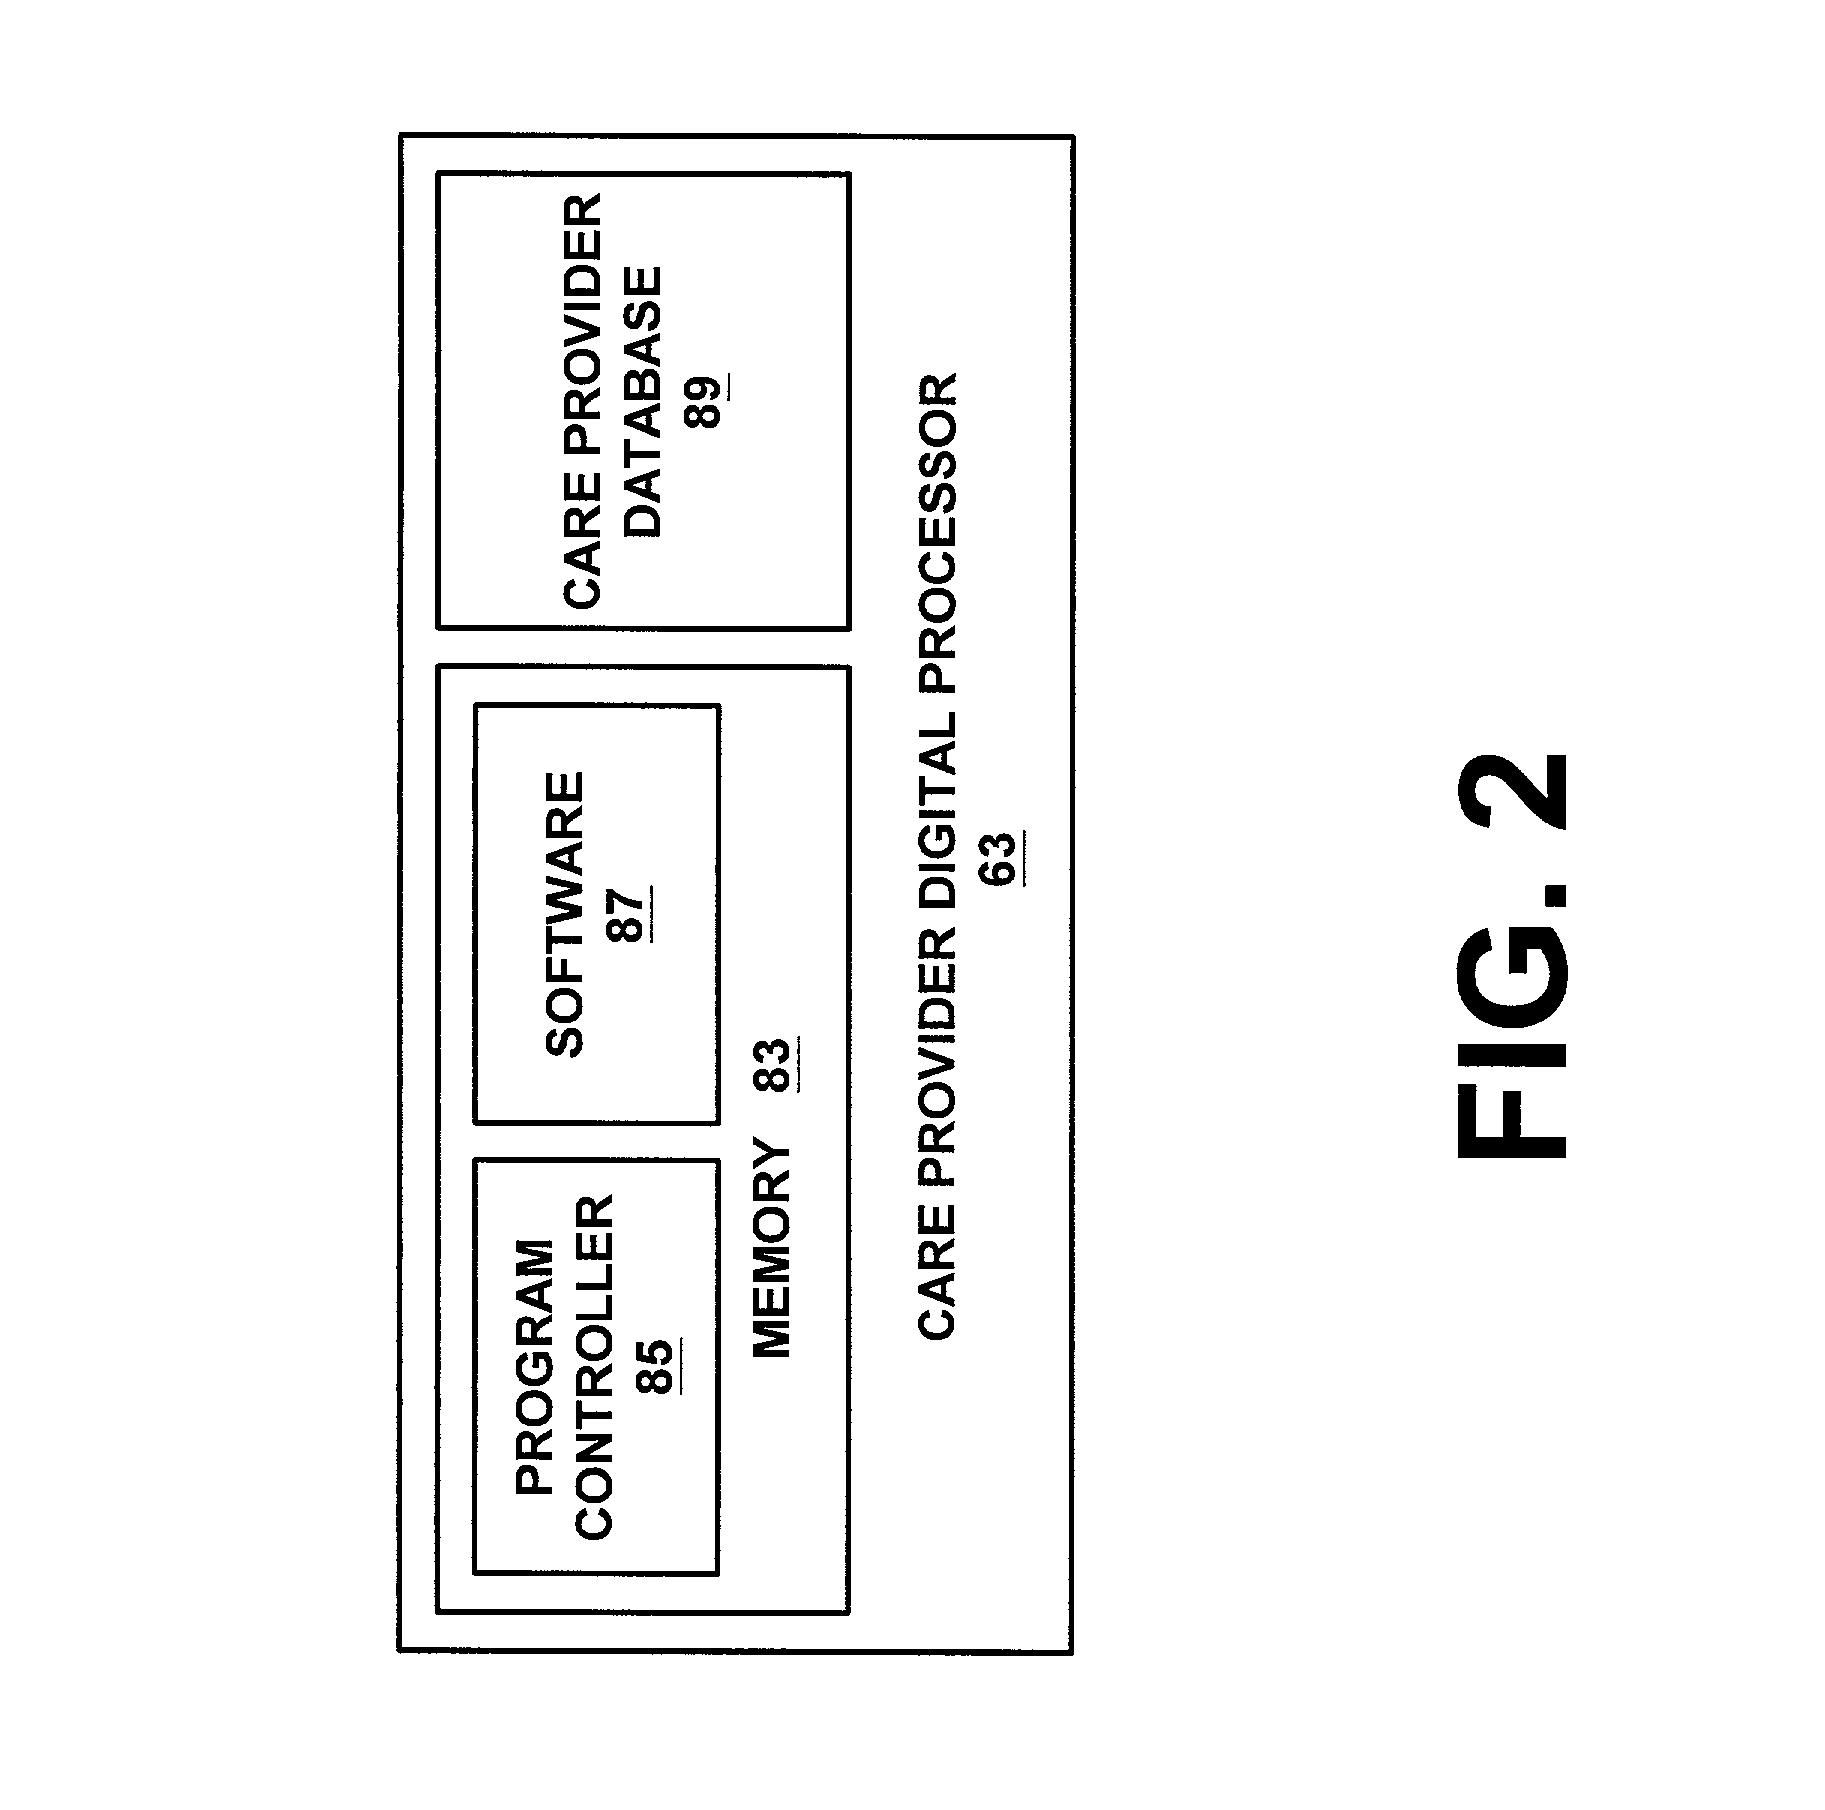 System and method for providing patient care management